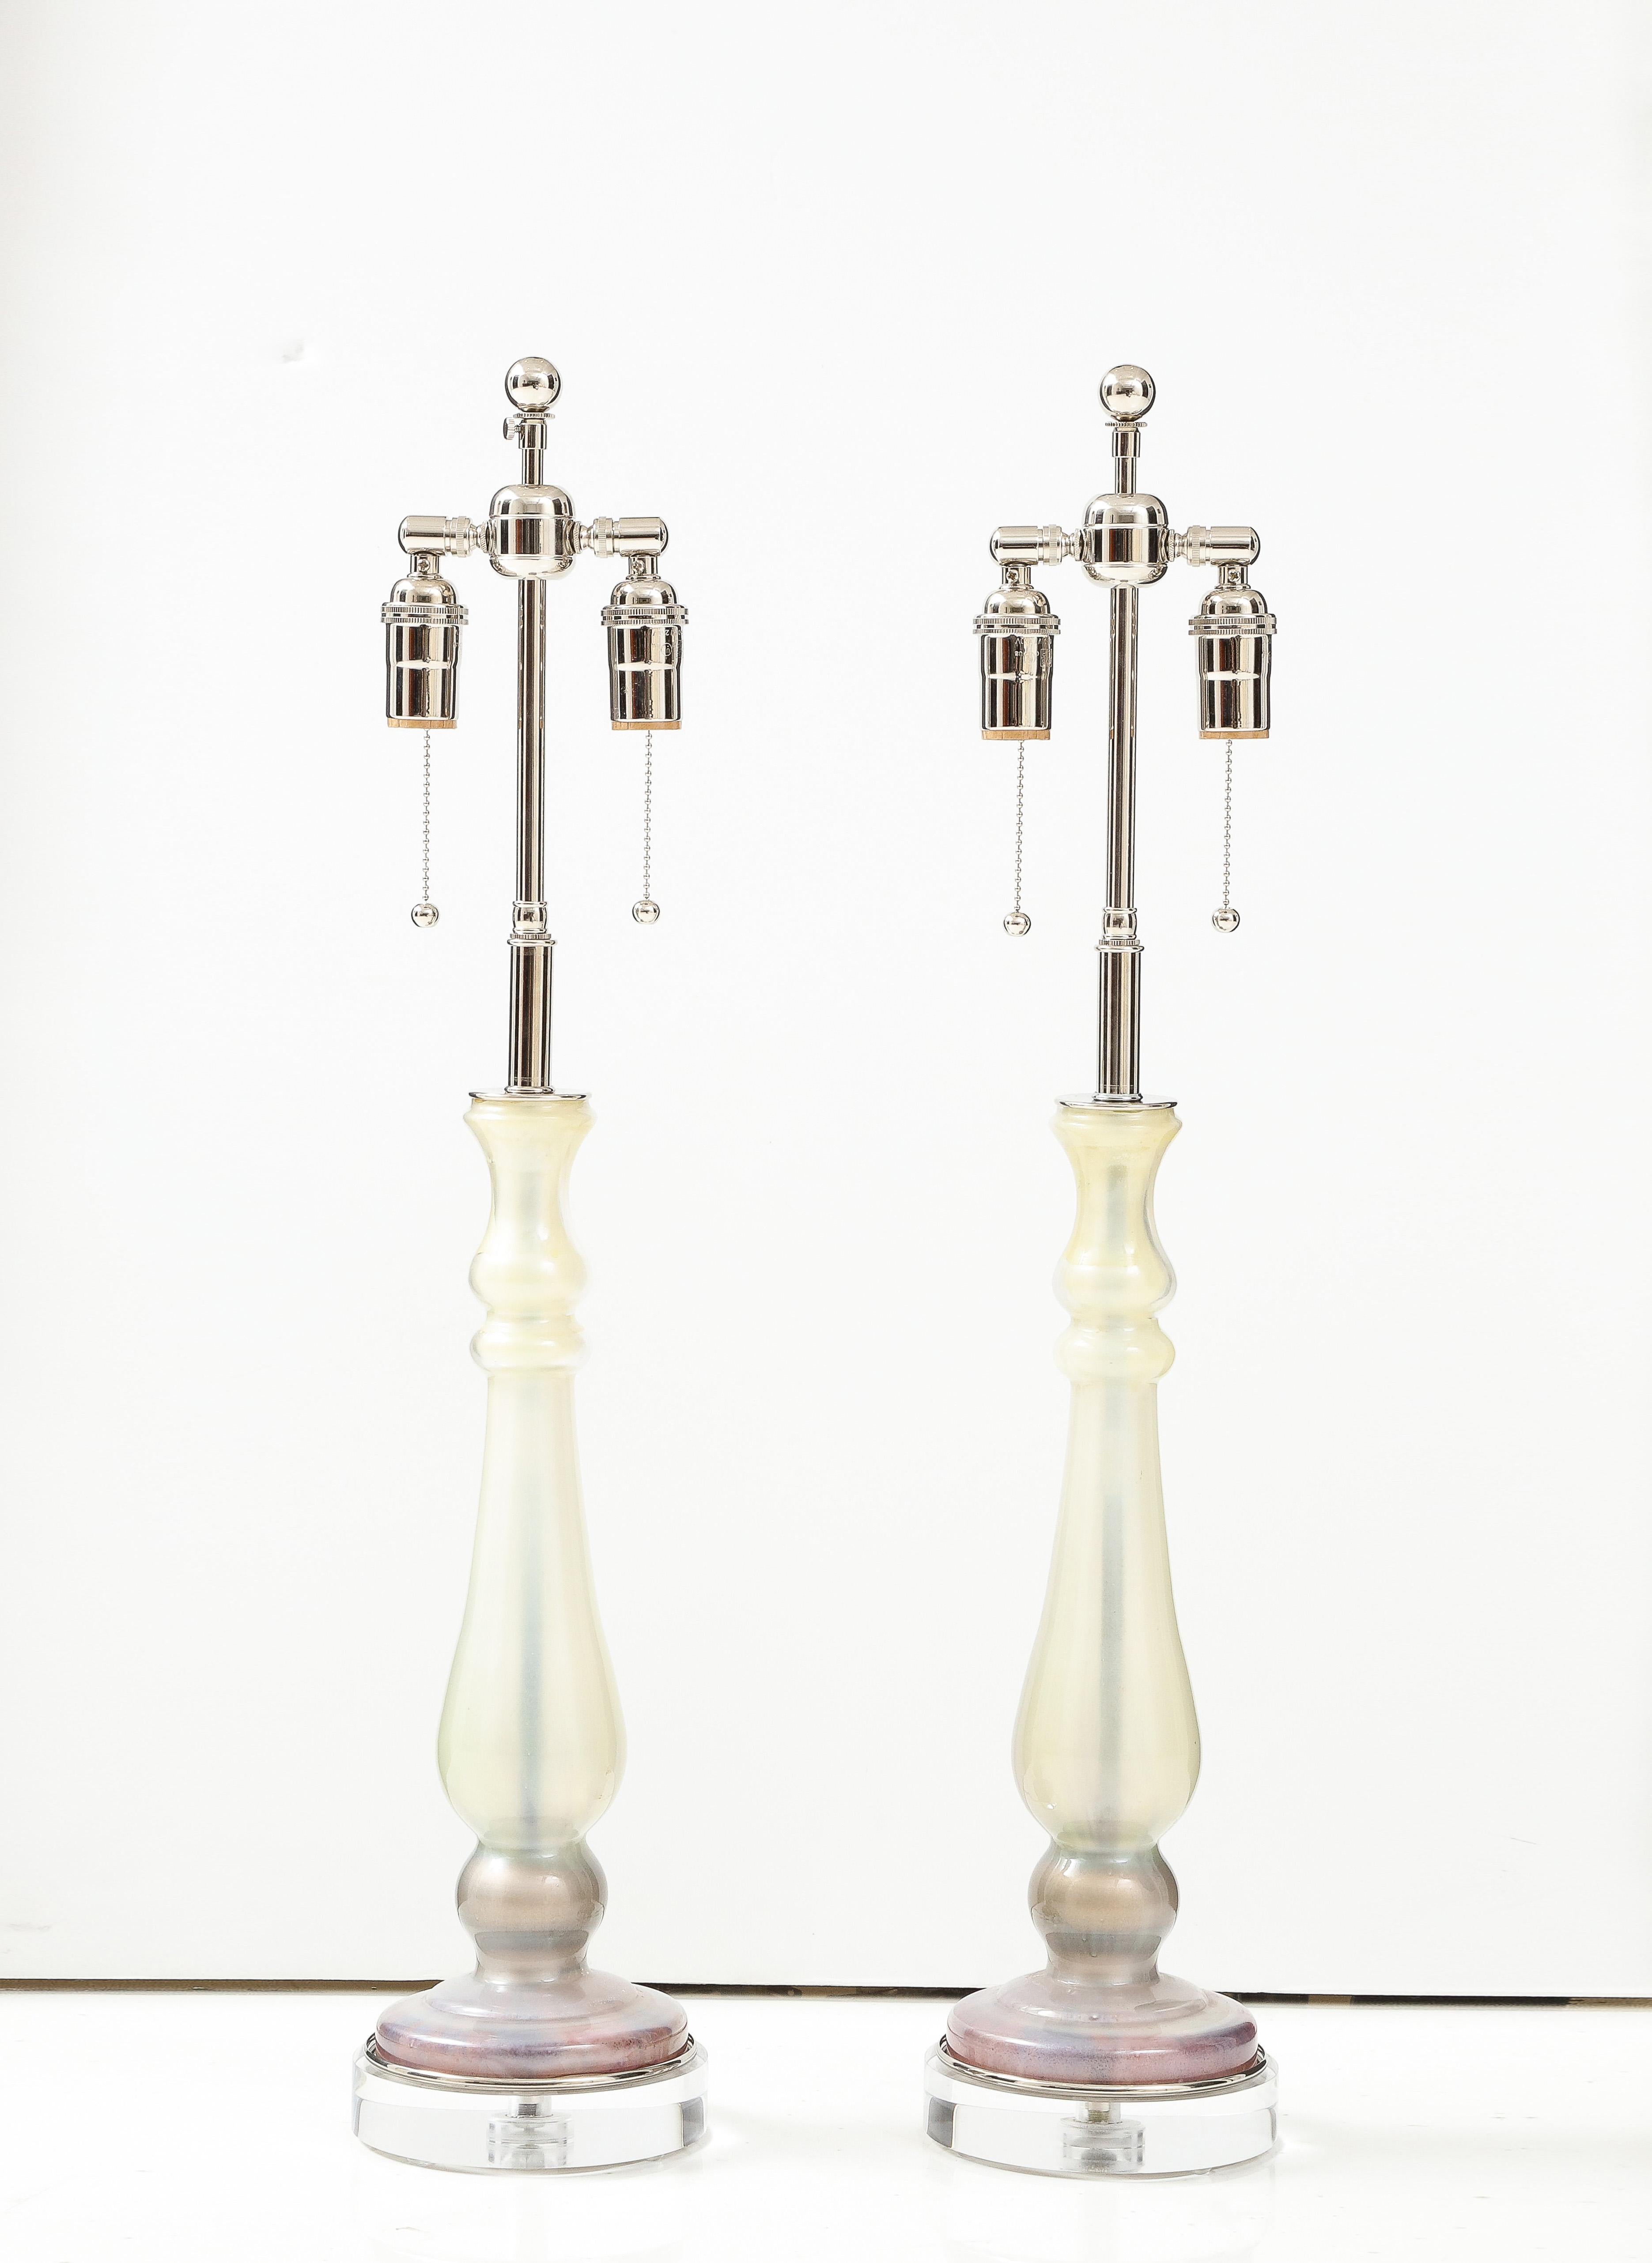 Pair of candlestick glass form lamps in shades of Ivory. Mauve and Gray.
The lamps are mounted on thick lucite bases and they have been Newly rewired with adjustable polished Nickel double clusters that take standard size light bulbs.
The height to